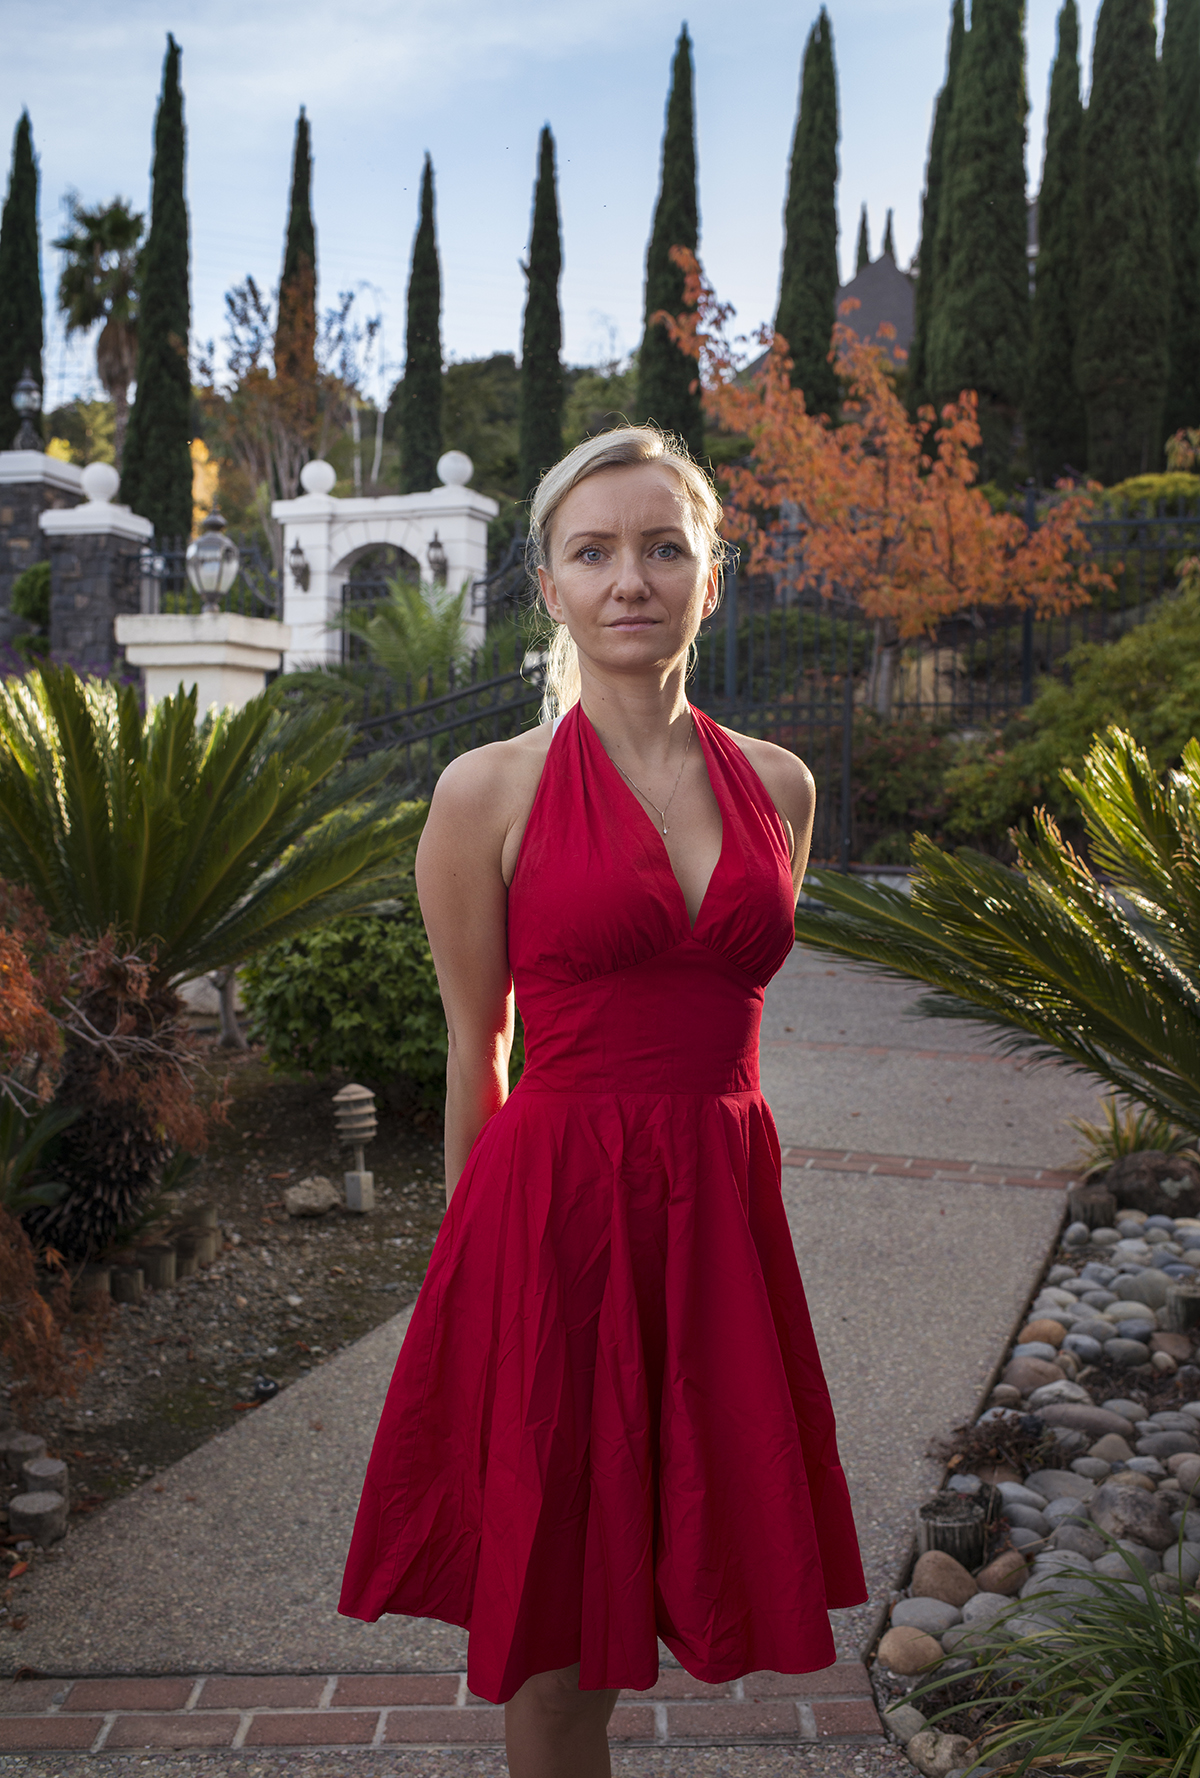 A person wearing a red dress stands looking to the camera.